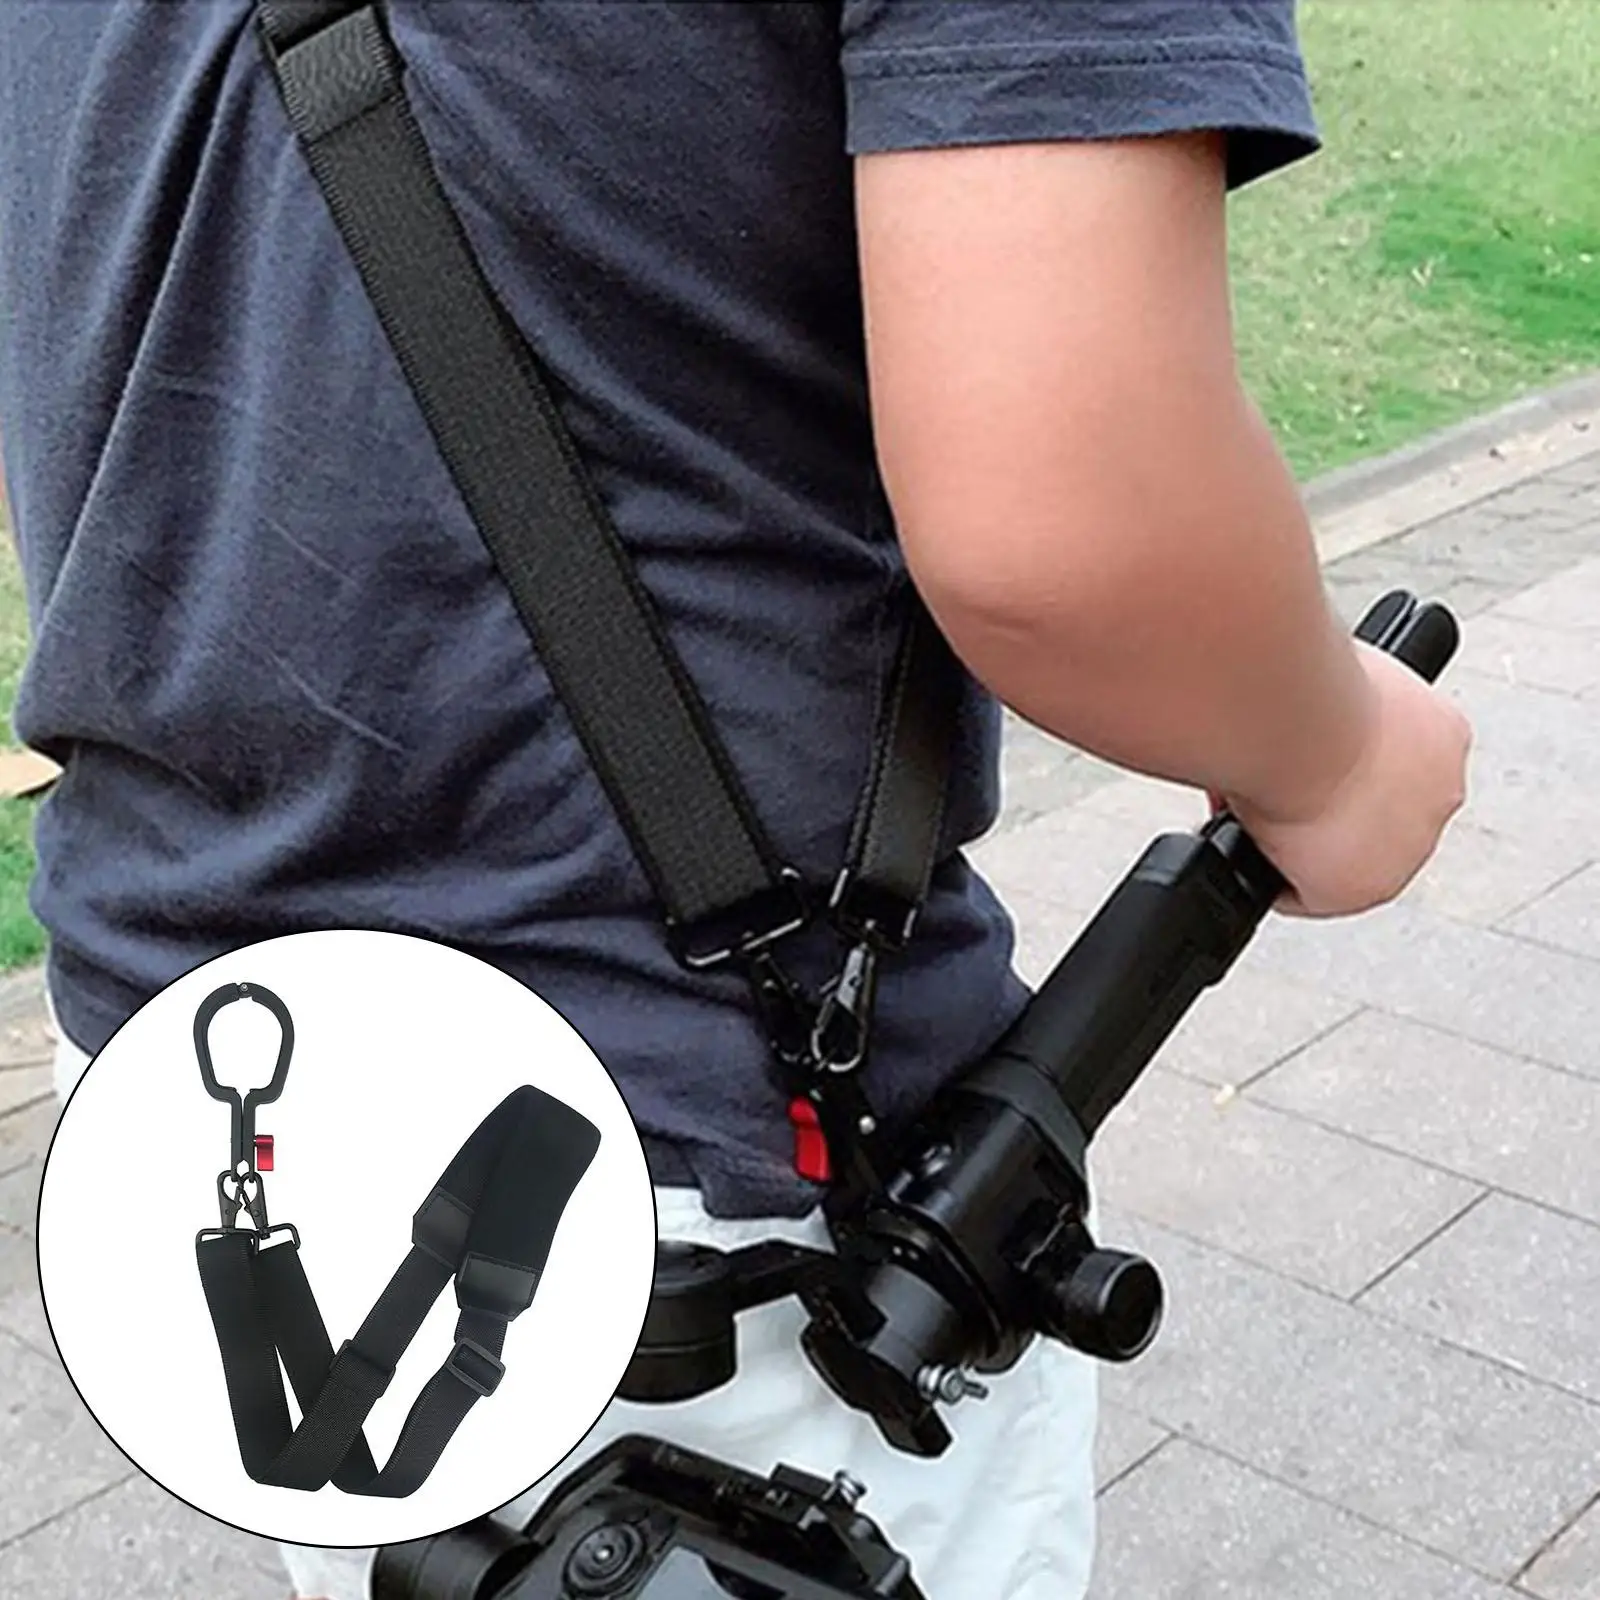 Handheld Stabilizer Hanging Strap Hang Buckle Photography Belt Sling Clasp for DJI Ronin SC Gimbal Stabilizer Accessories